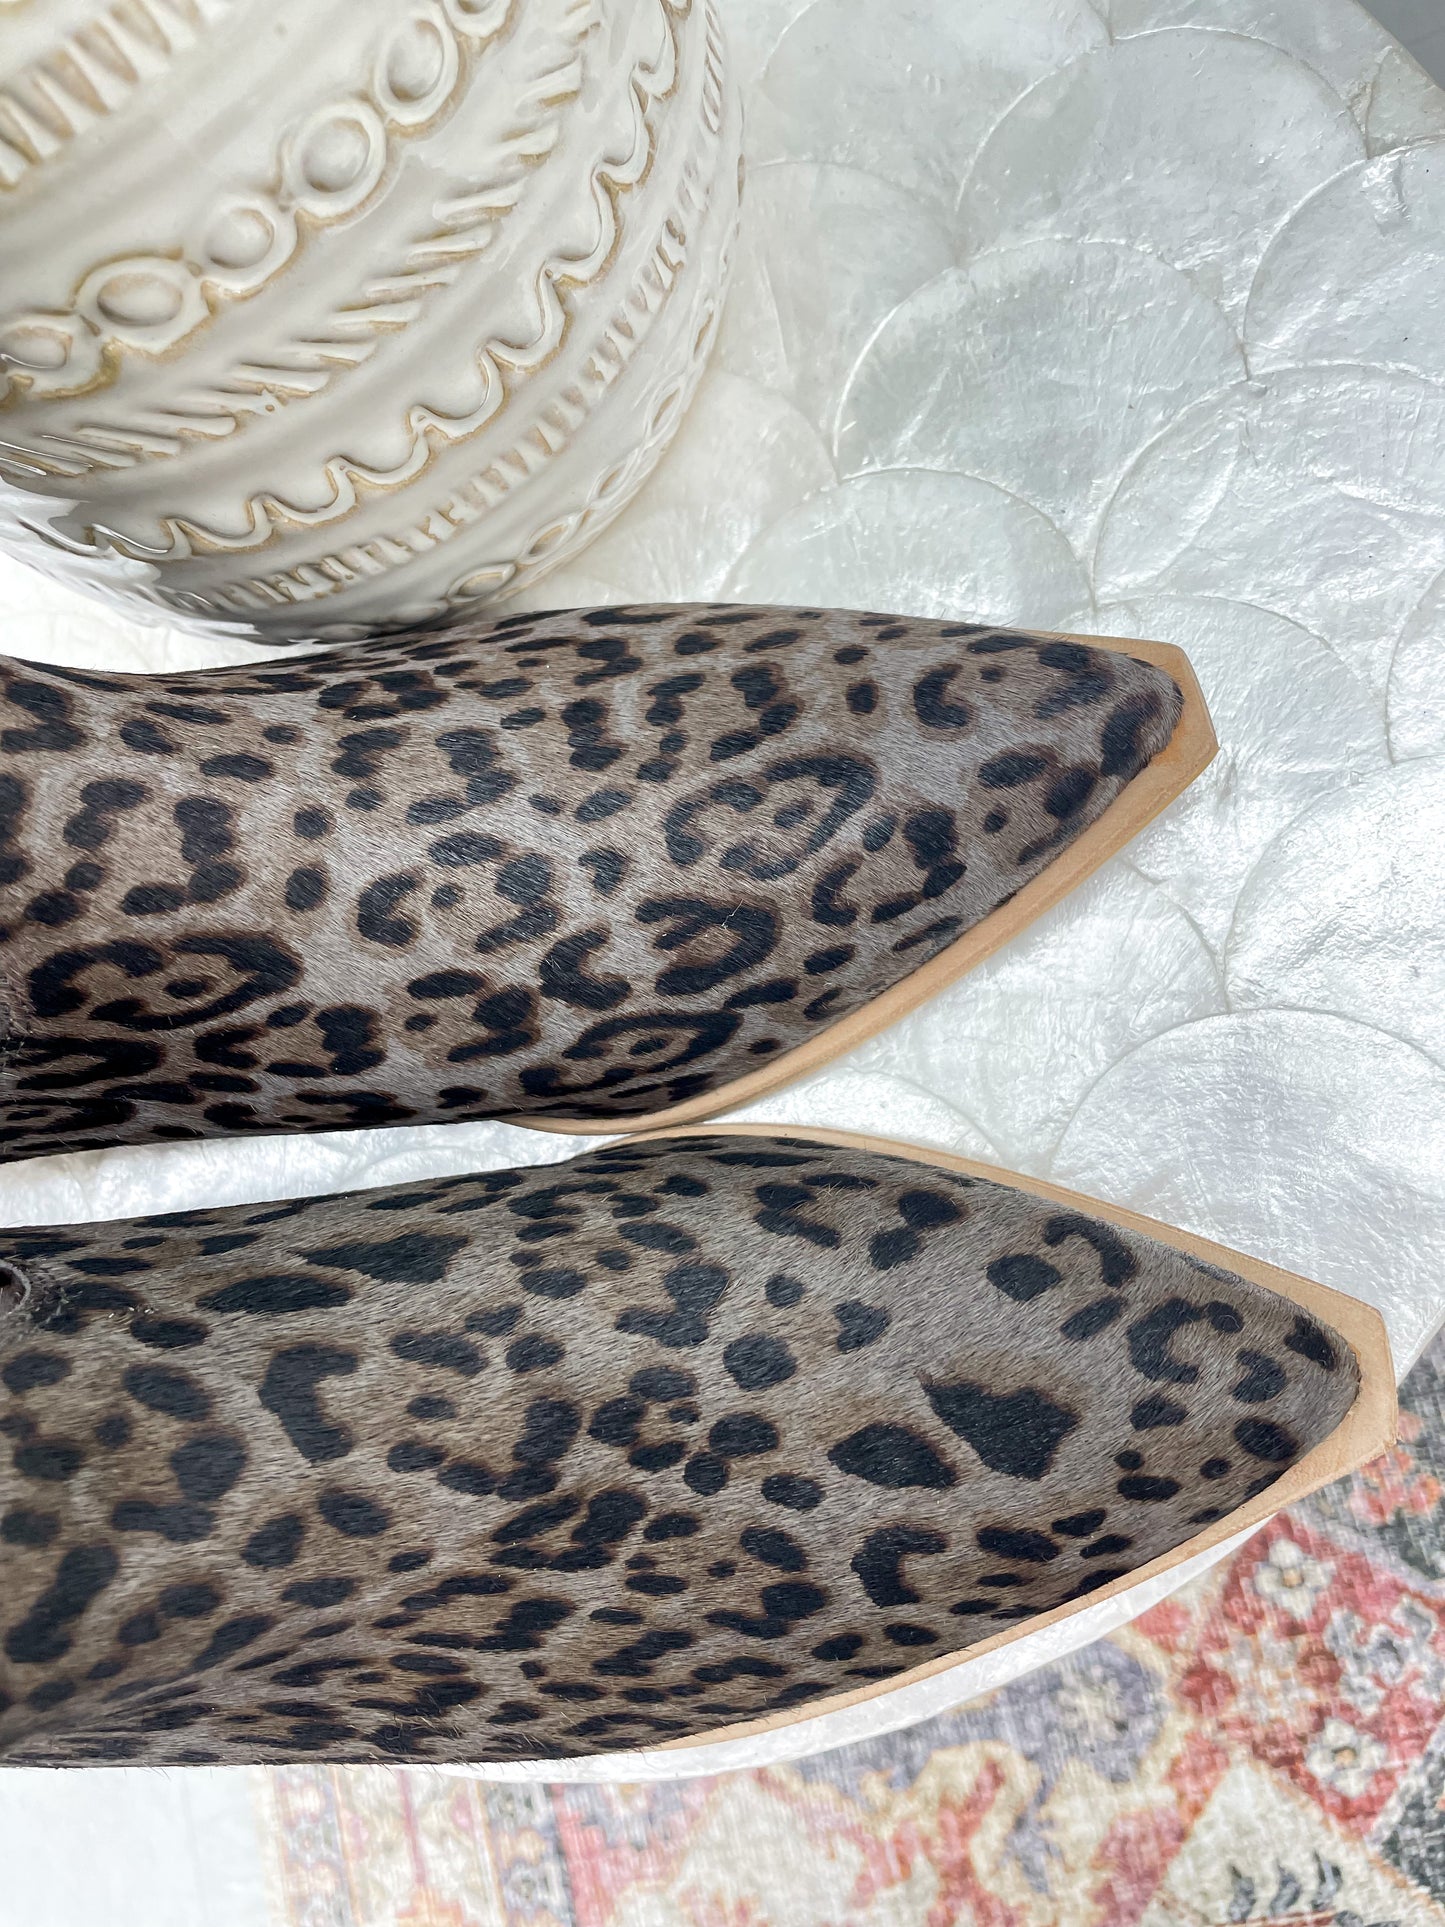 The Toni Gray Leopard Western Boots